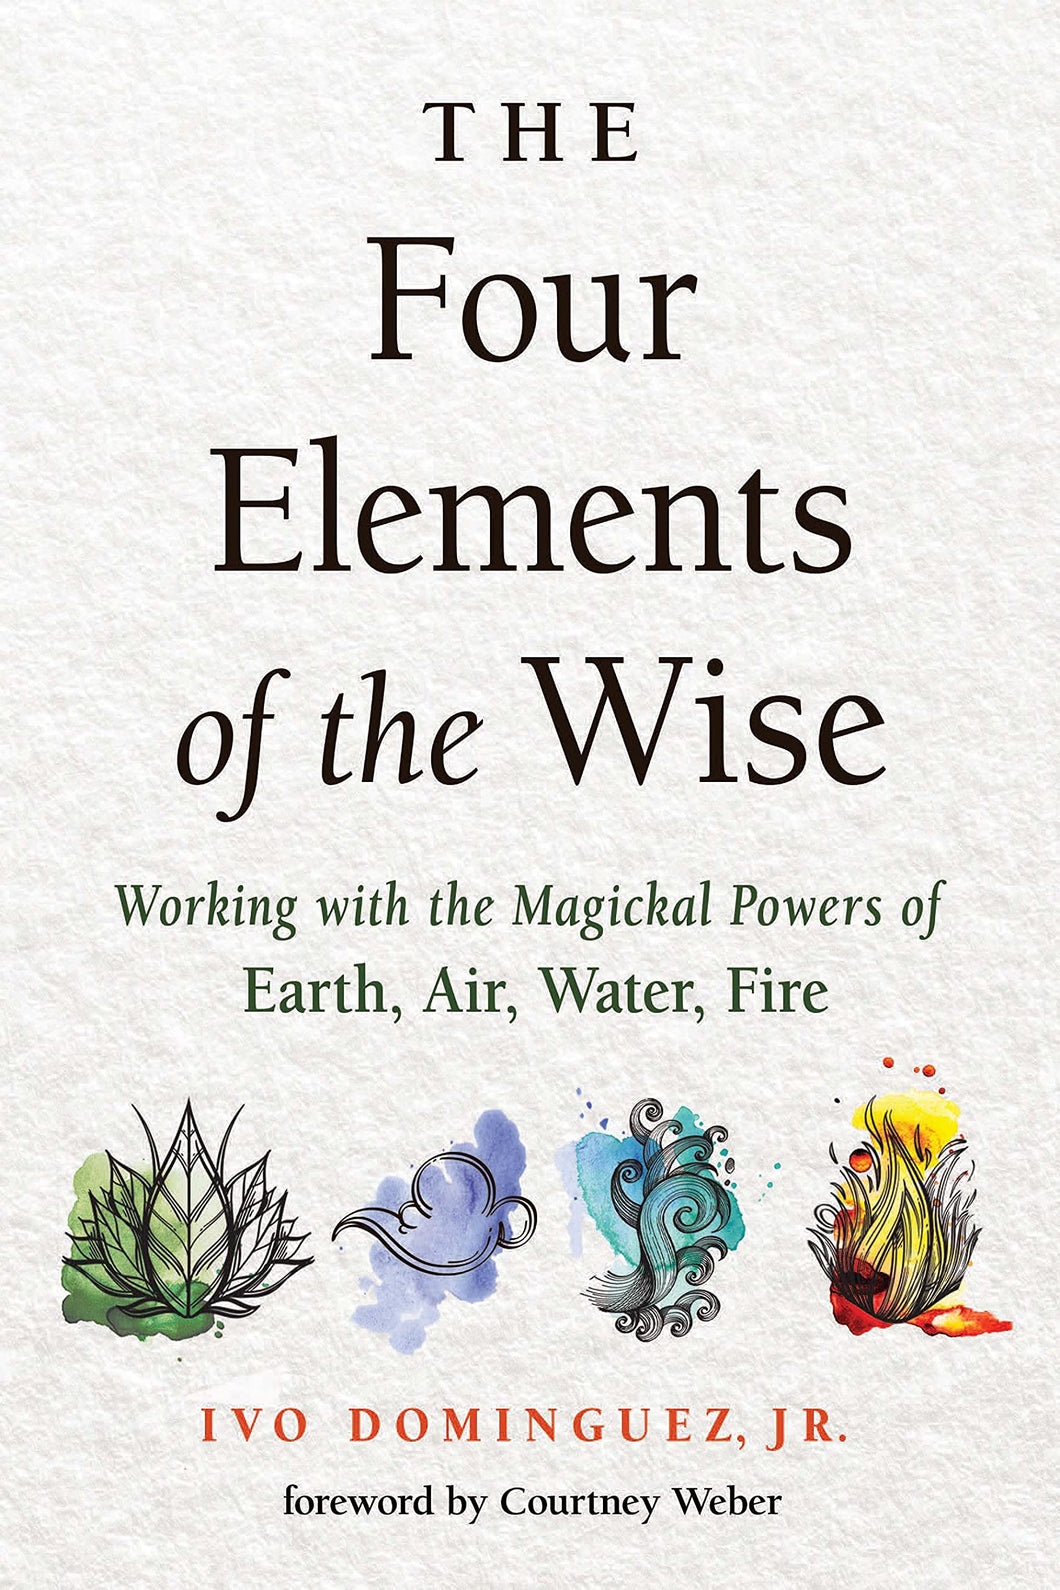 The Four Elements of the Wise: Working with the Magickal Powers of Earth, Air, Water, Fire [Ivo Dominguez]